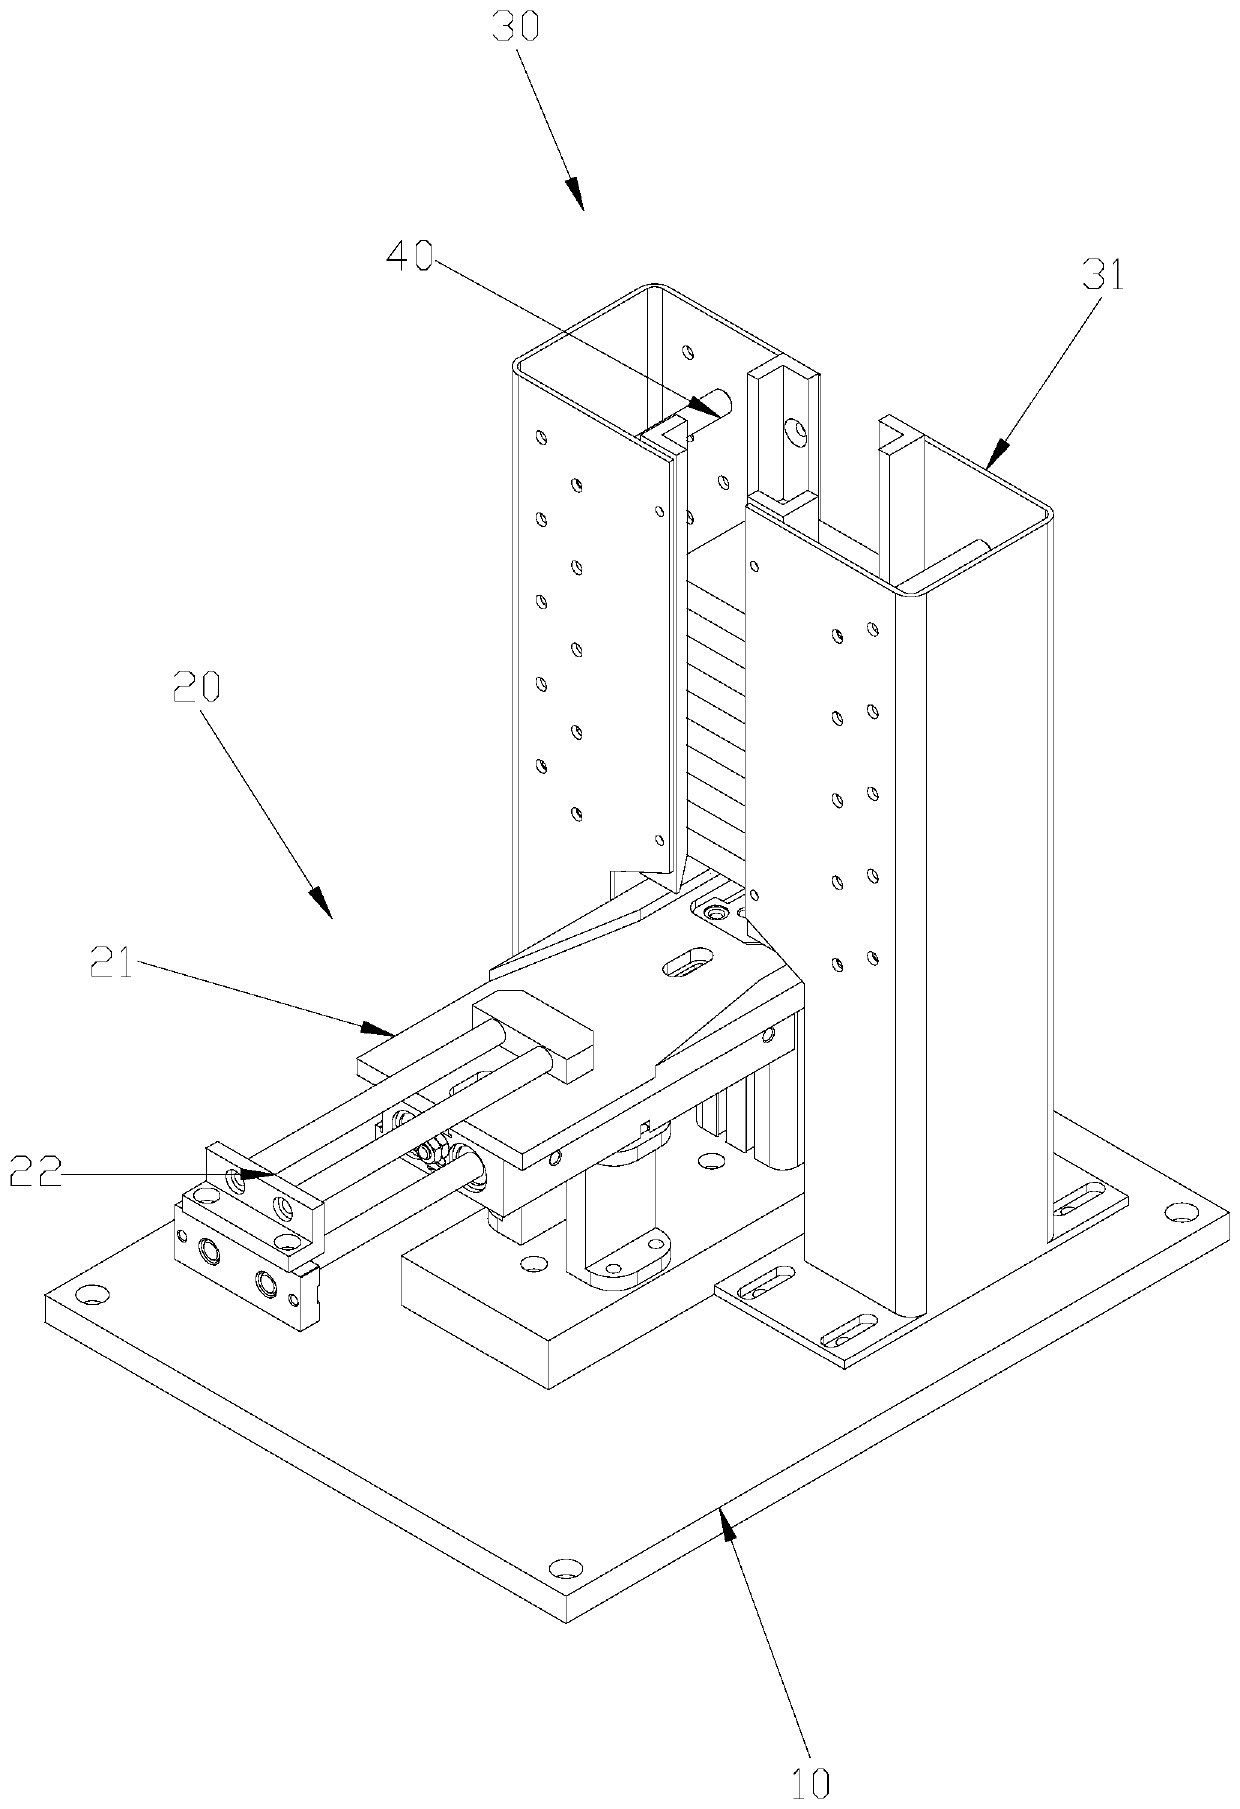 Vertical stacking and feeding device